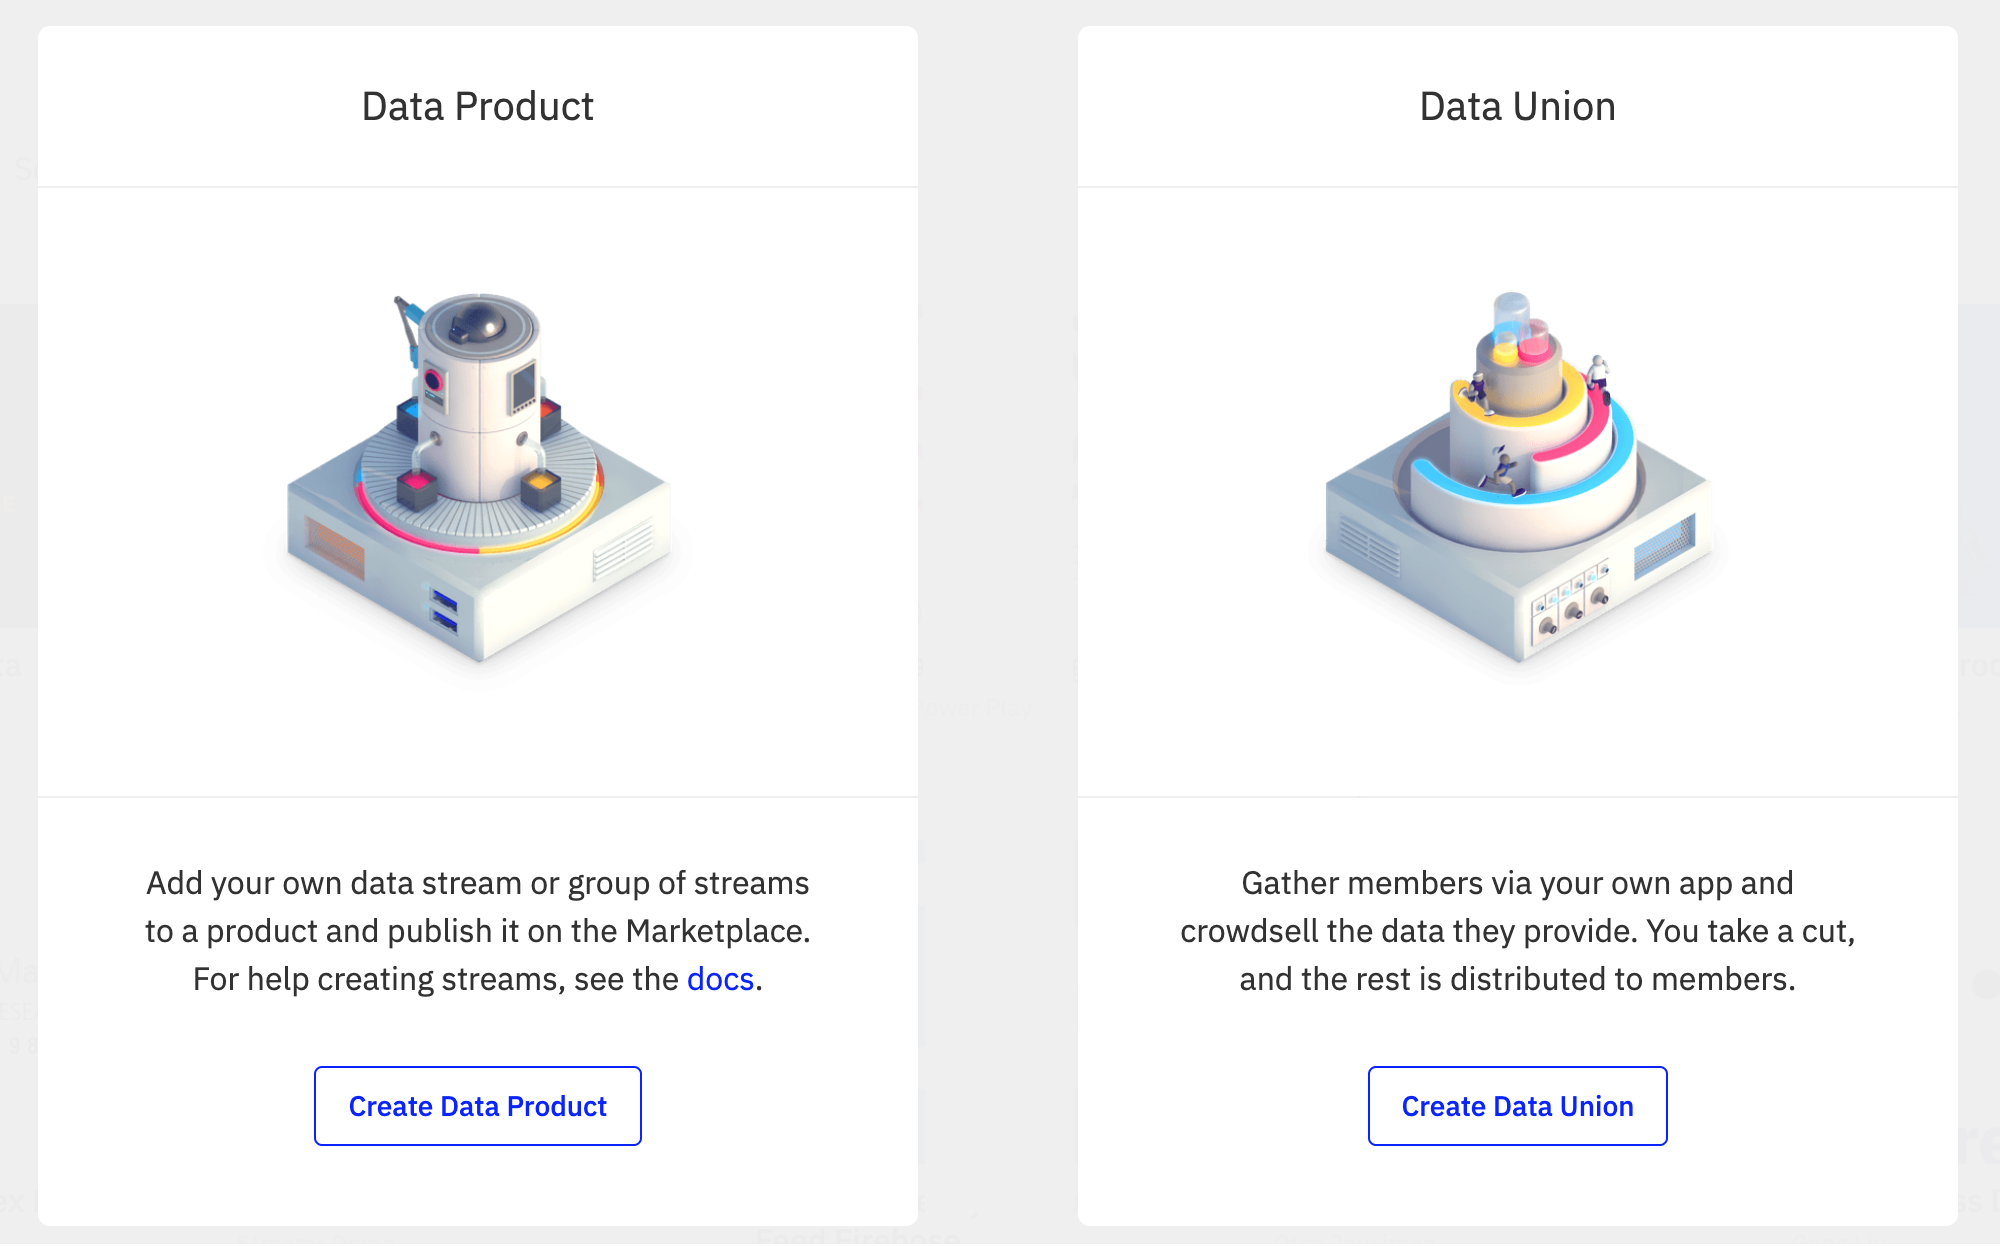 The Data Union public beta is now live